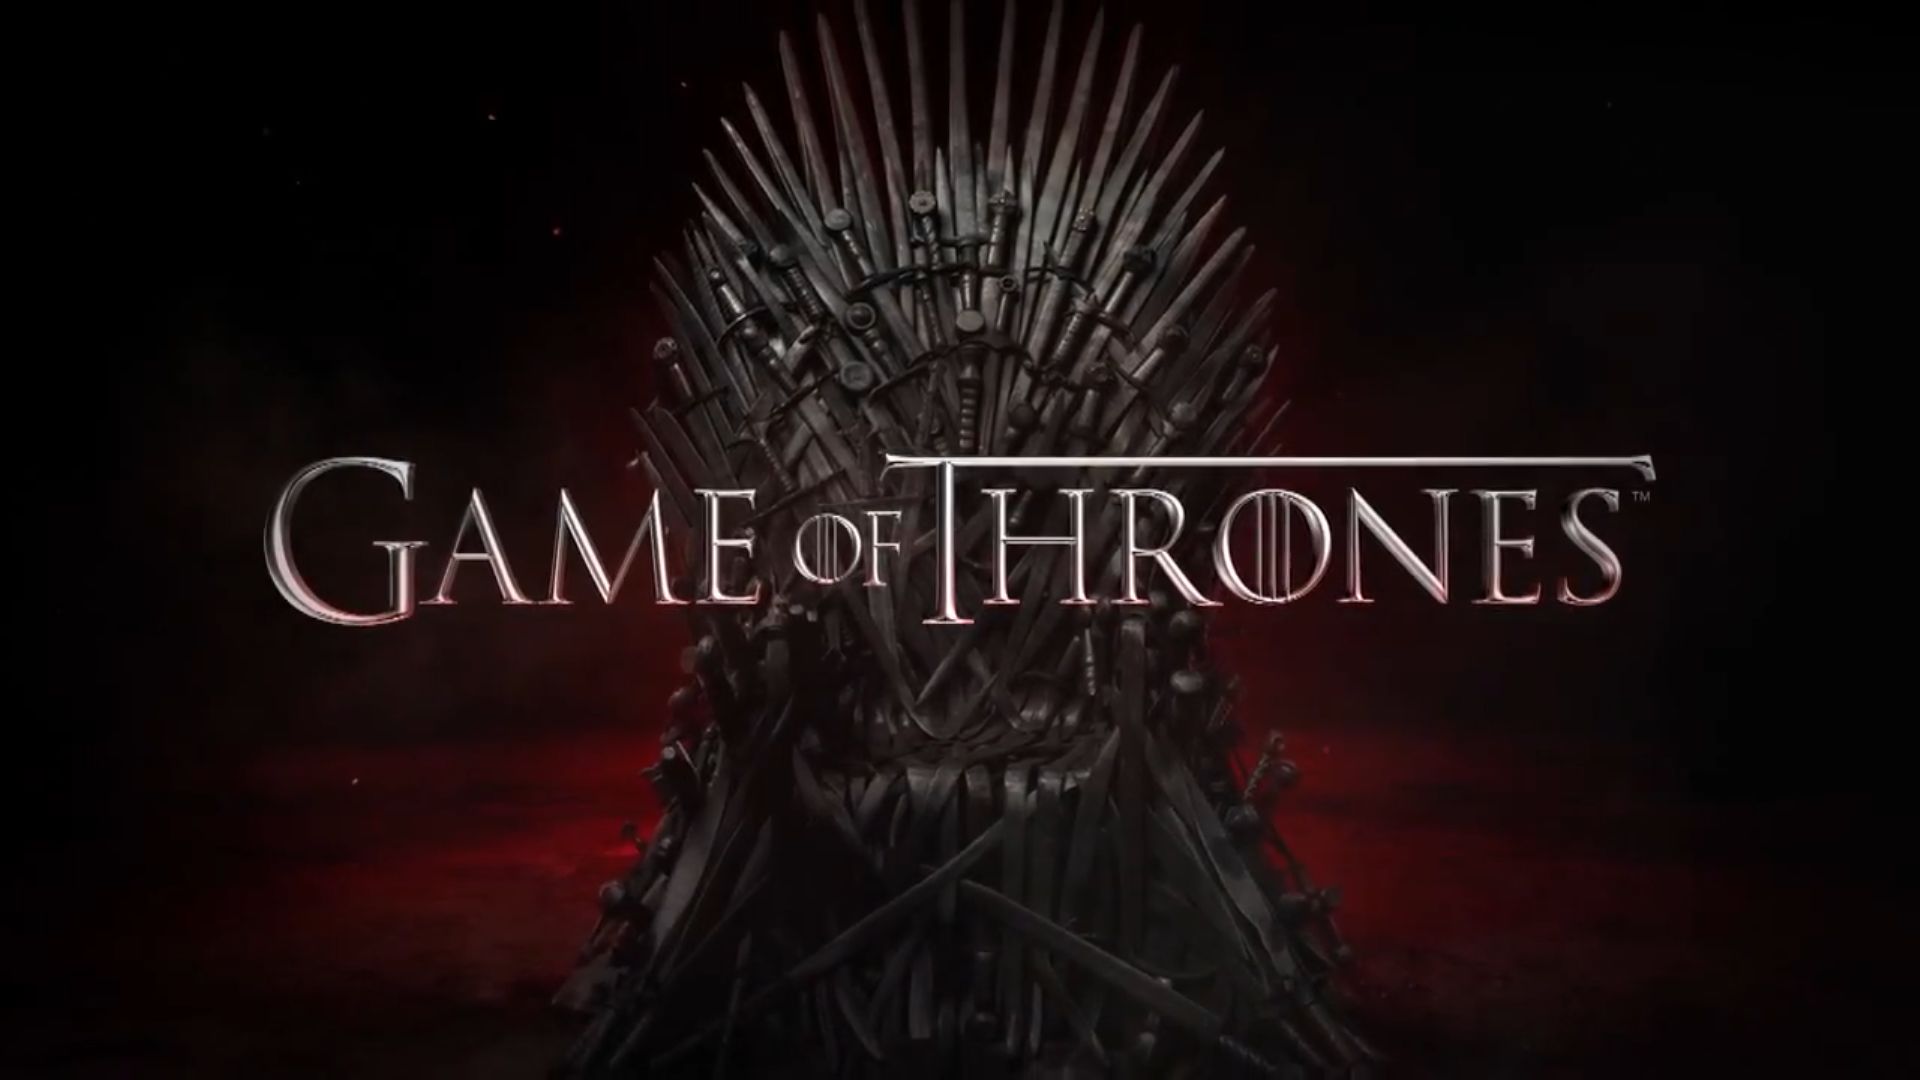 Valar morghulis hype train begins with the first game of thrones season six poster